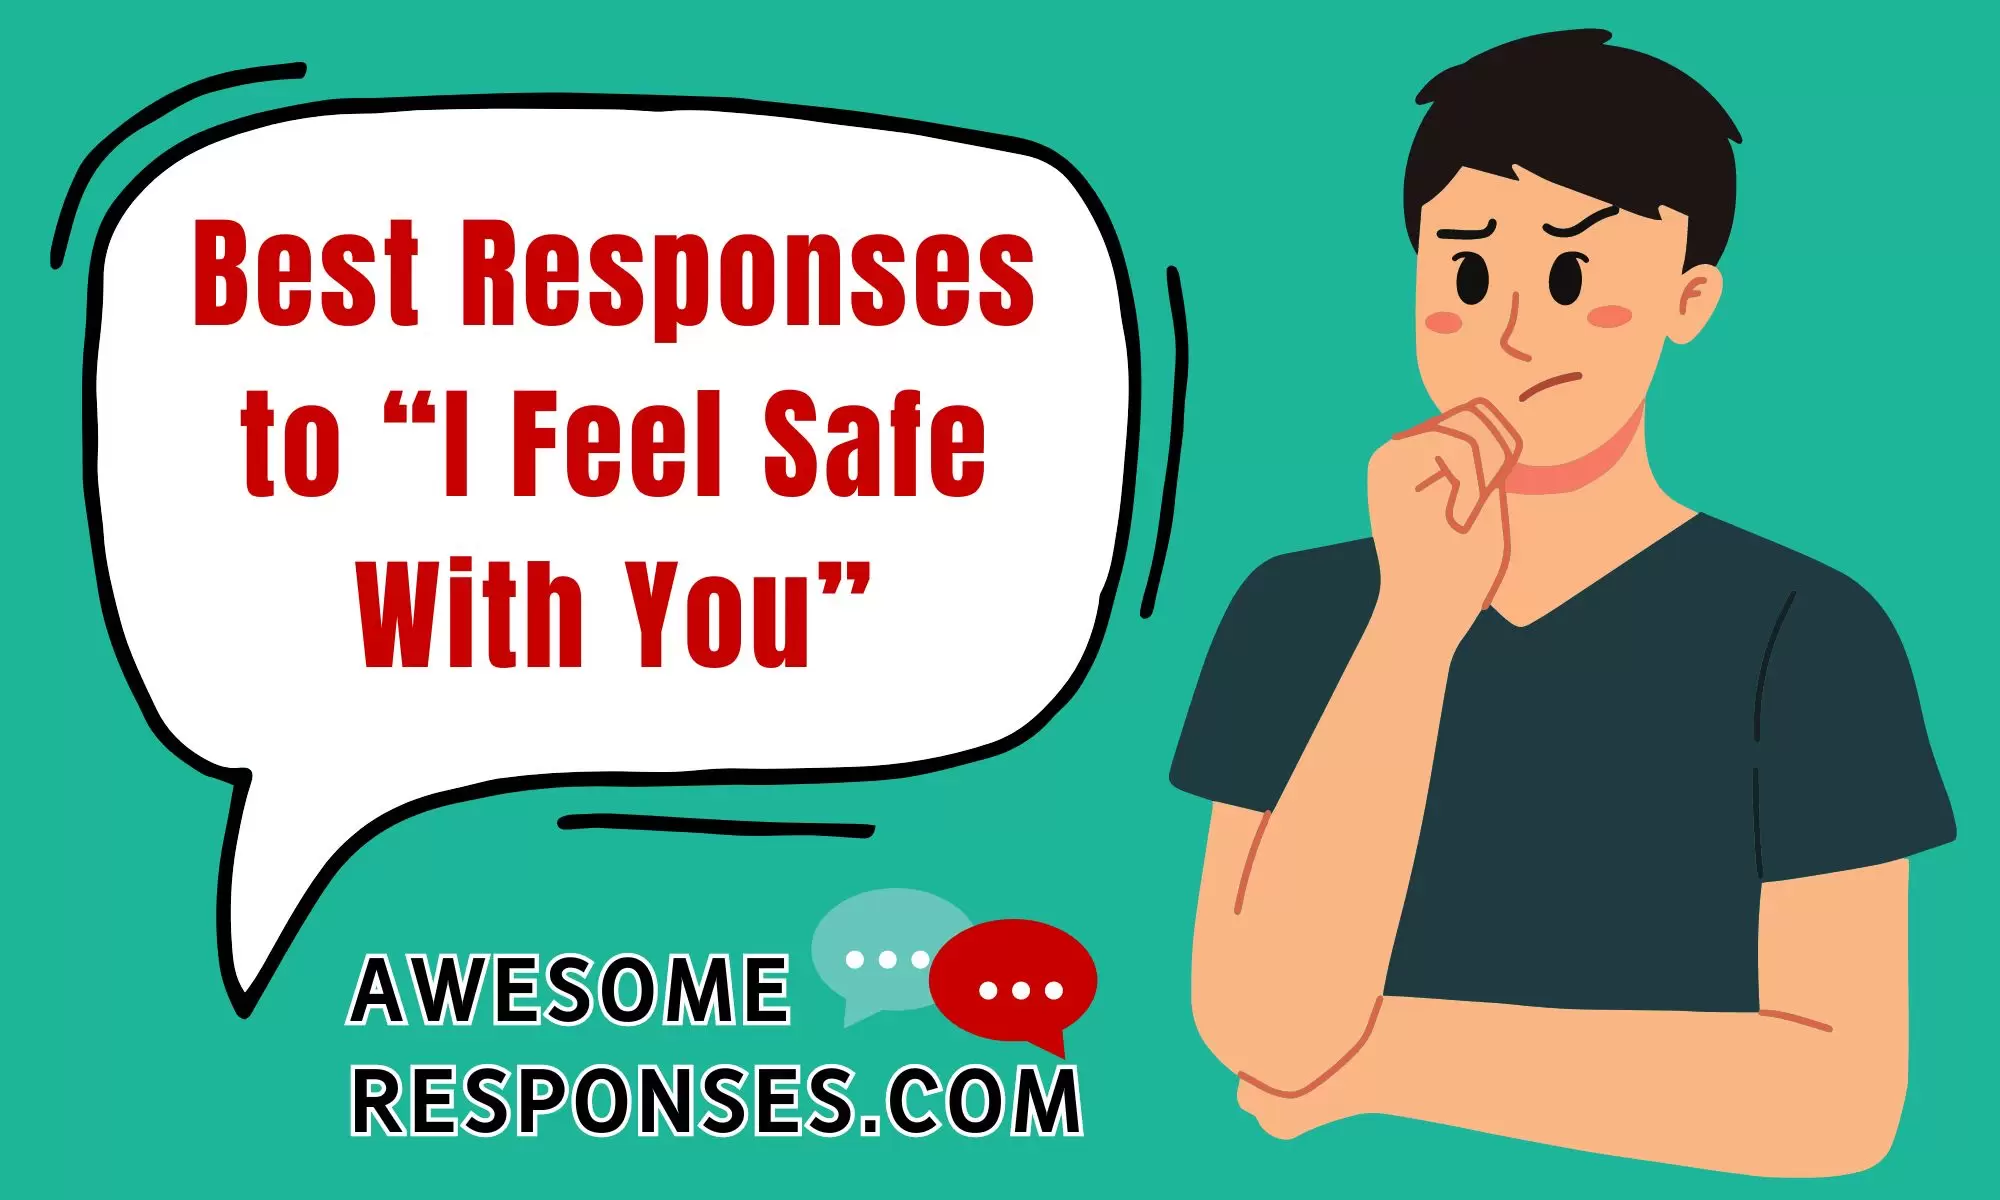 Best Responses to “I Feel Safe With You”